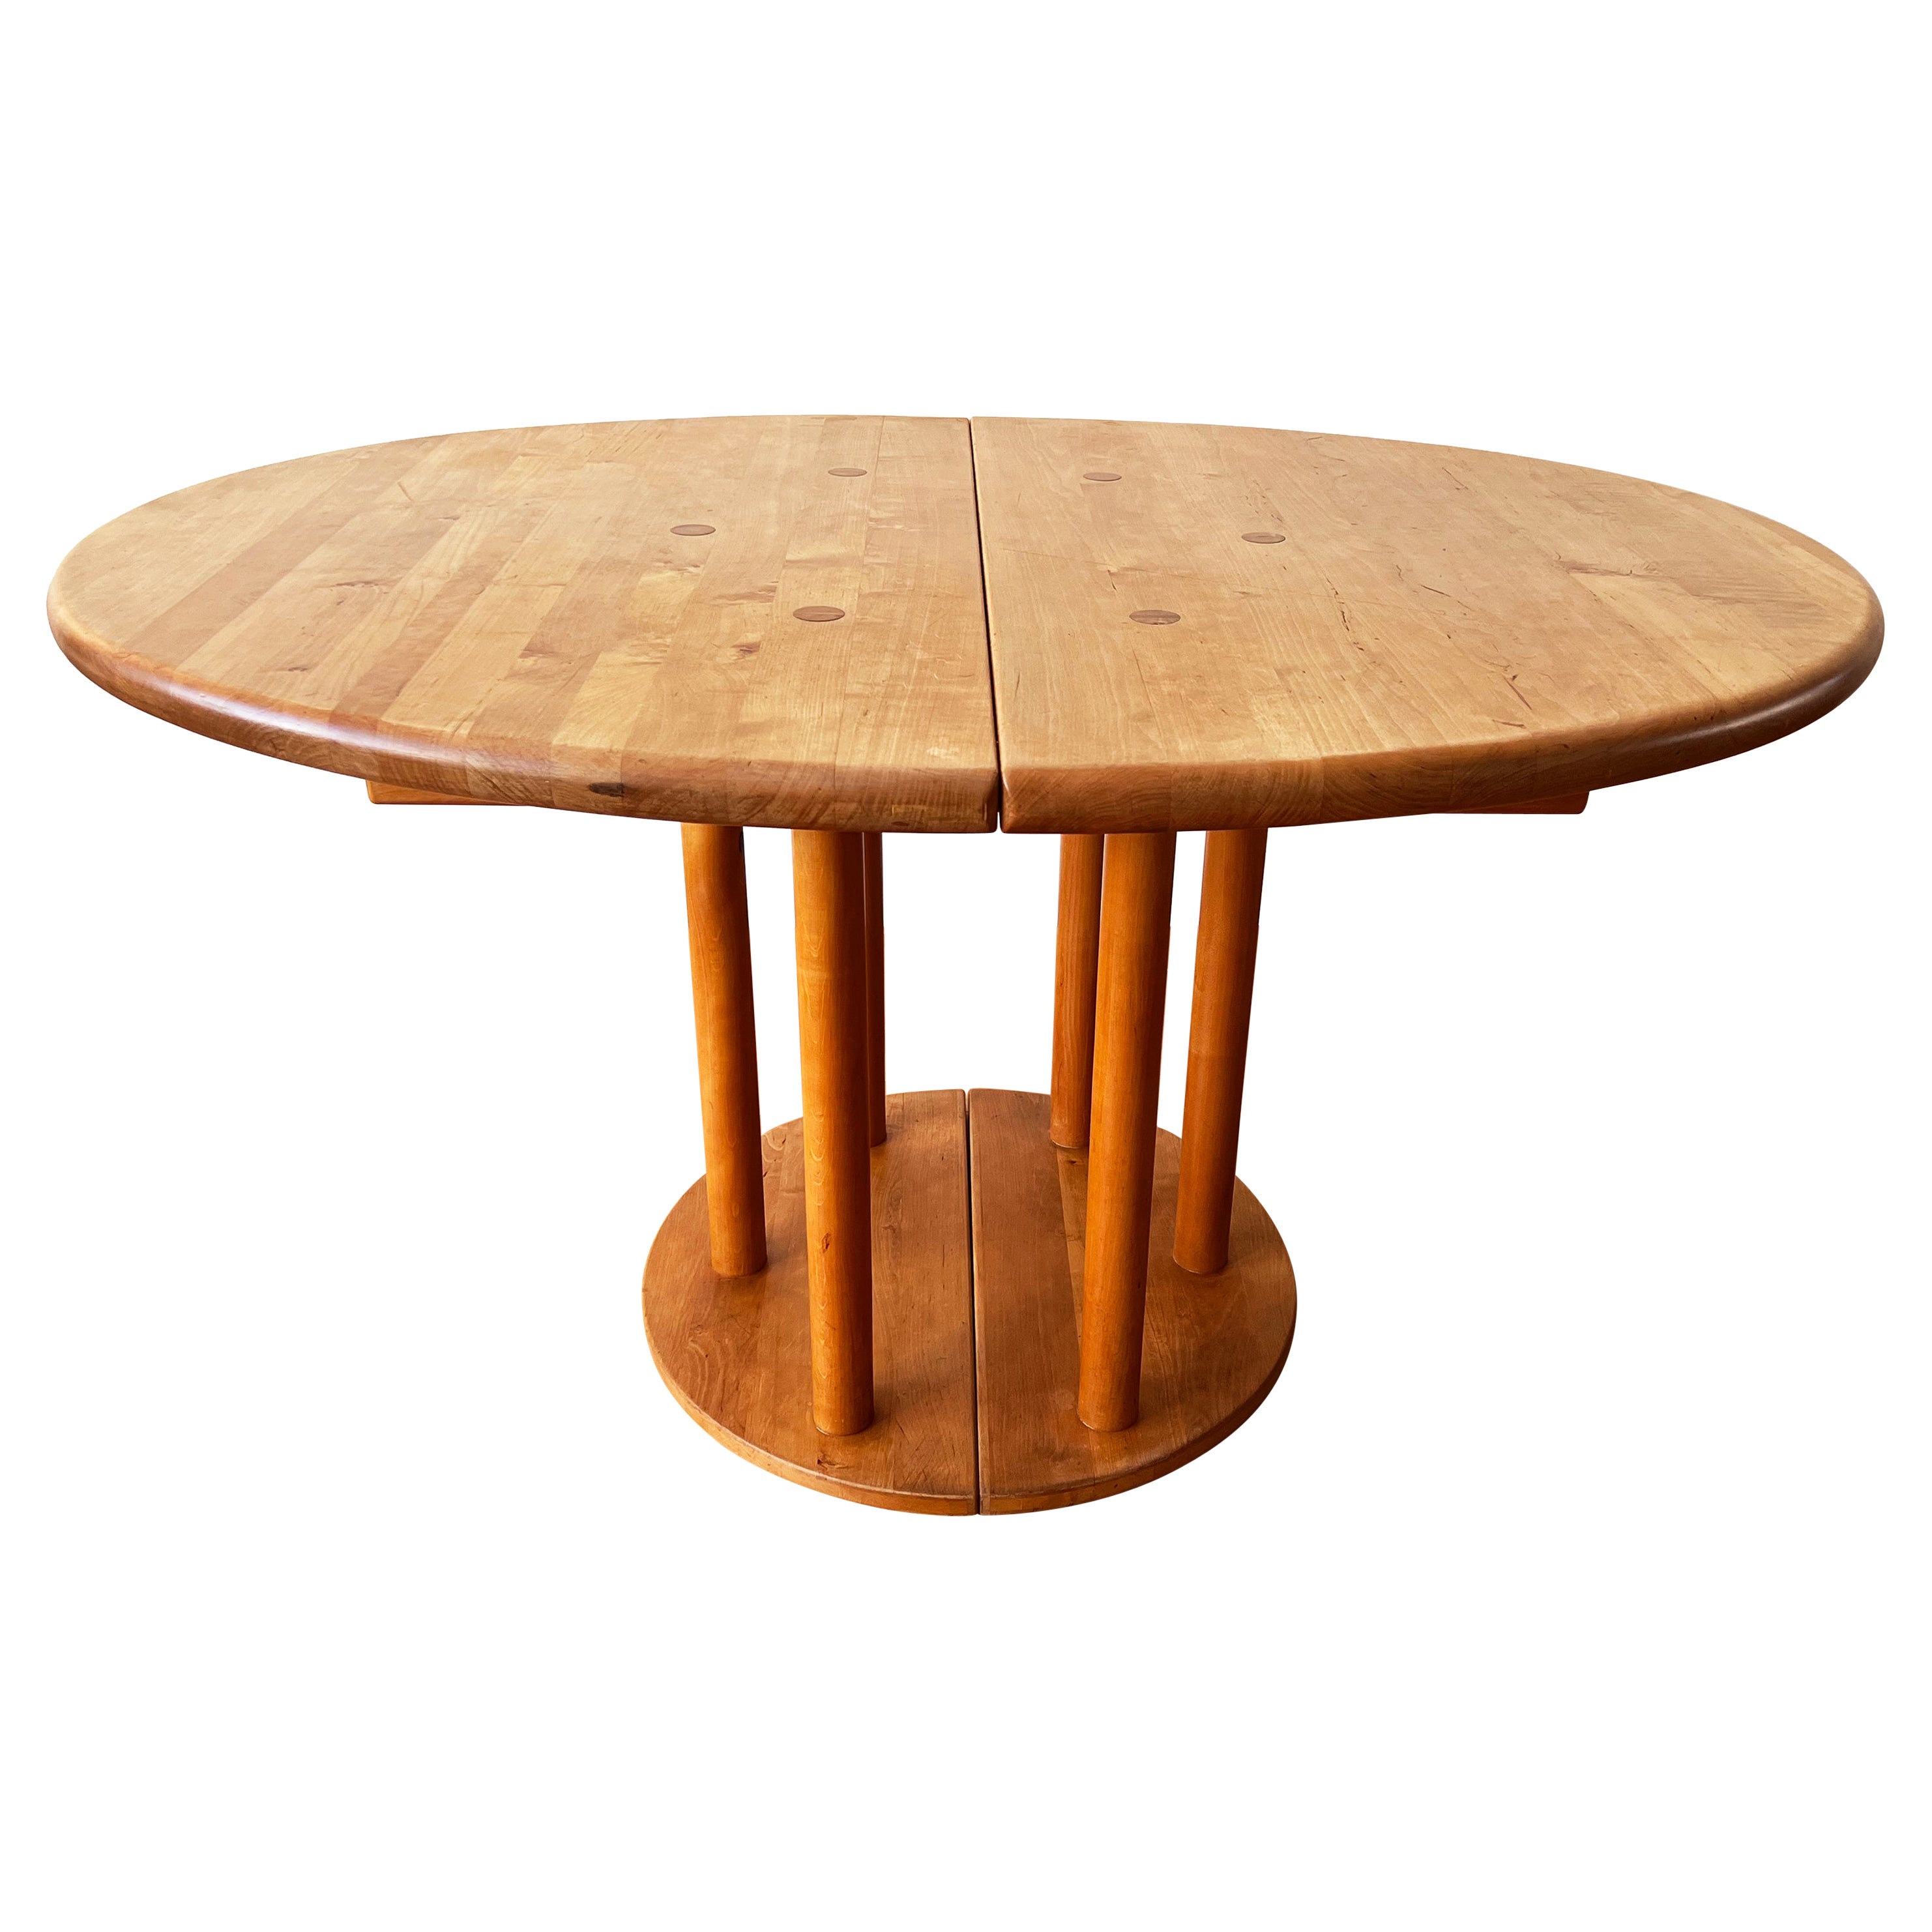 Round Post Modern Brutalist MCM Beech Extendable Dining Table + Leaf For Sale